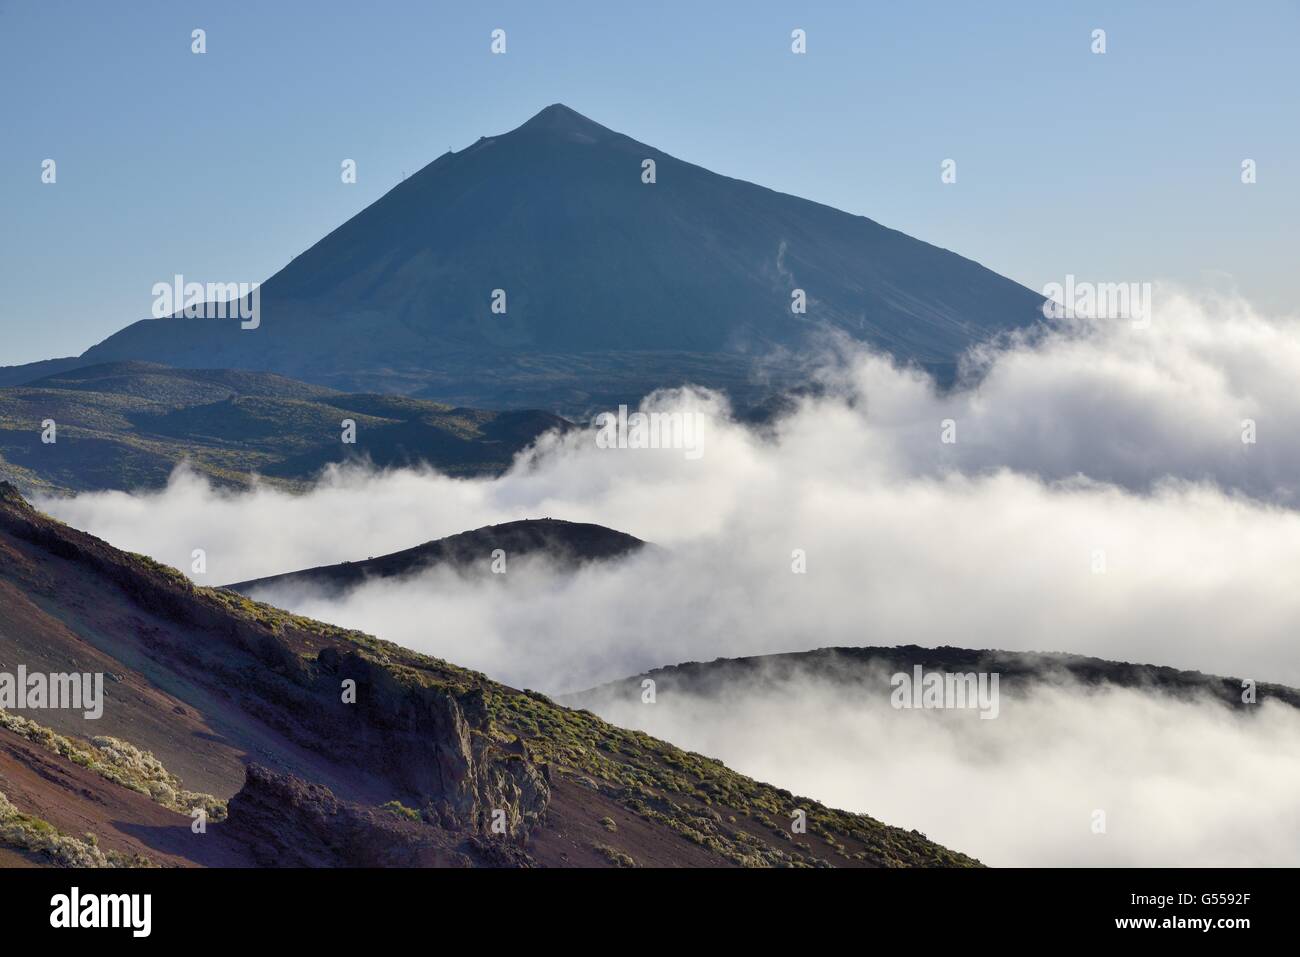 Volcanic slopes and ridges below Mount Teide with a sea of cloud rising, Teide National Park, Tenerife. Stock Photo